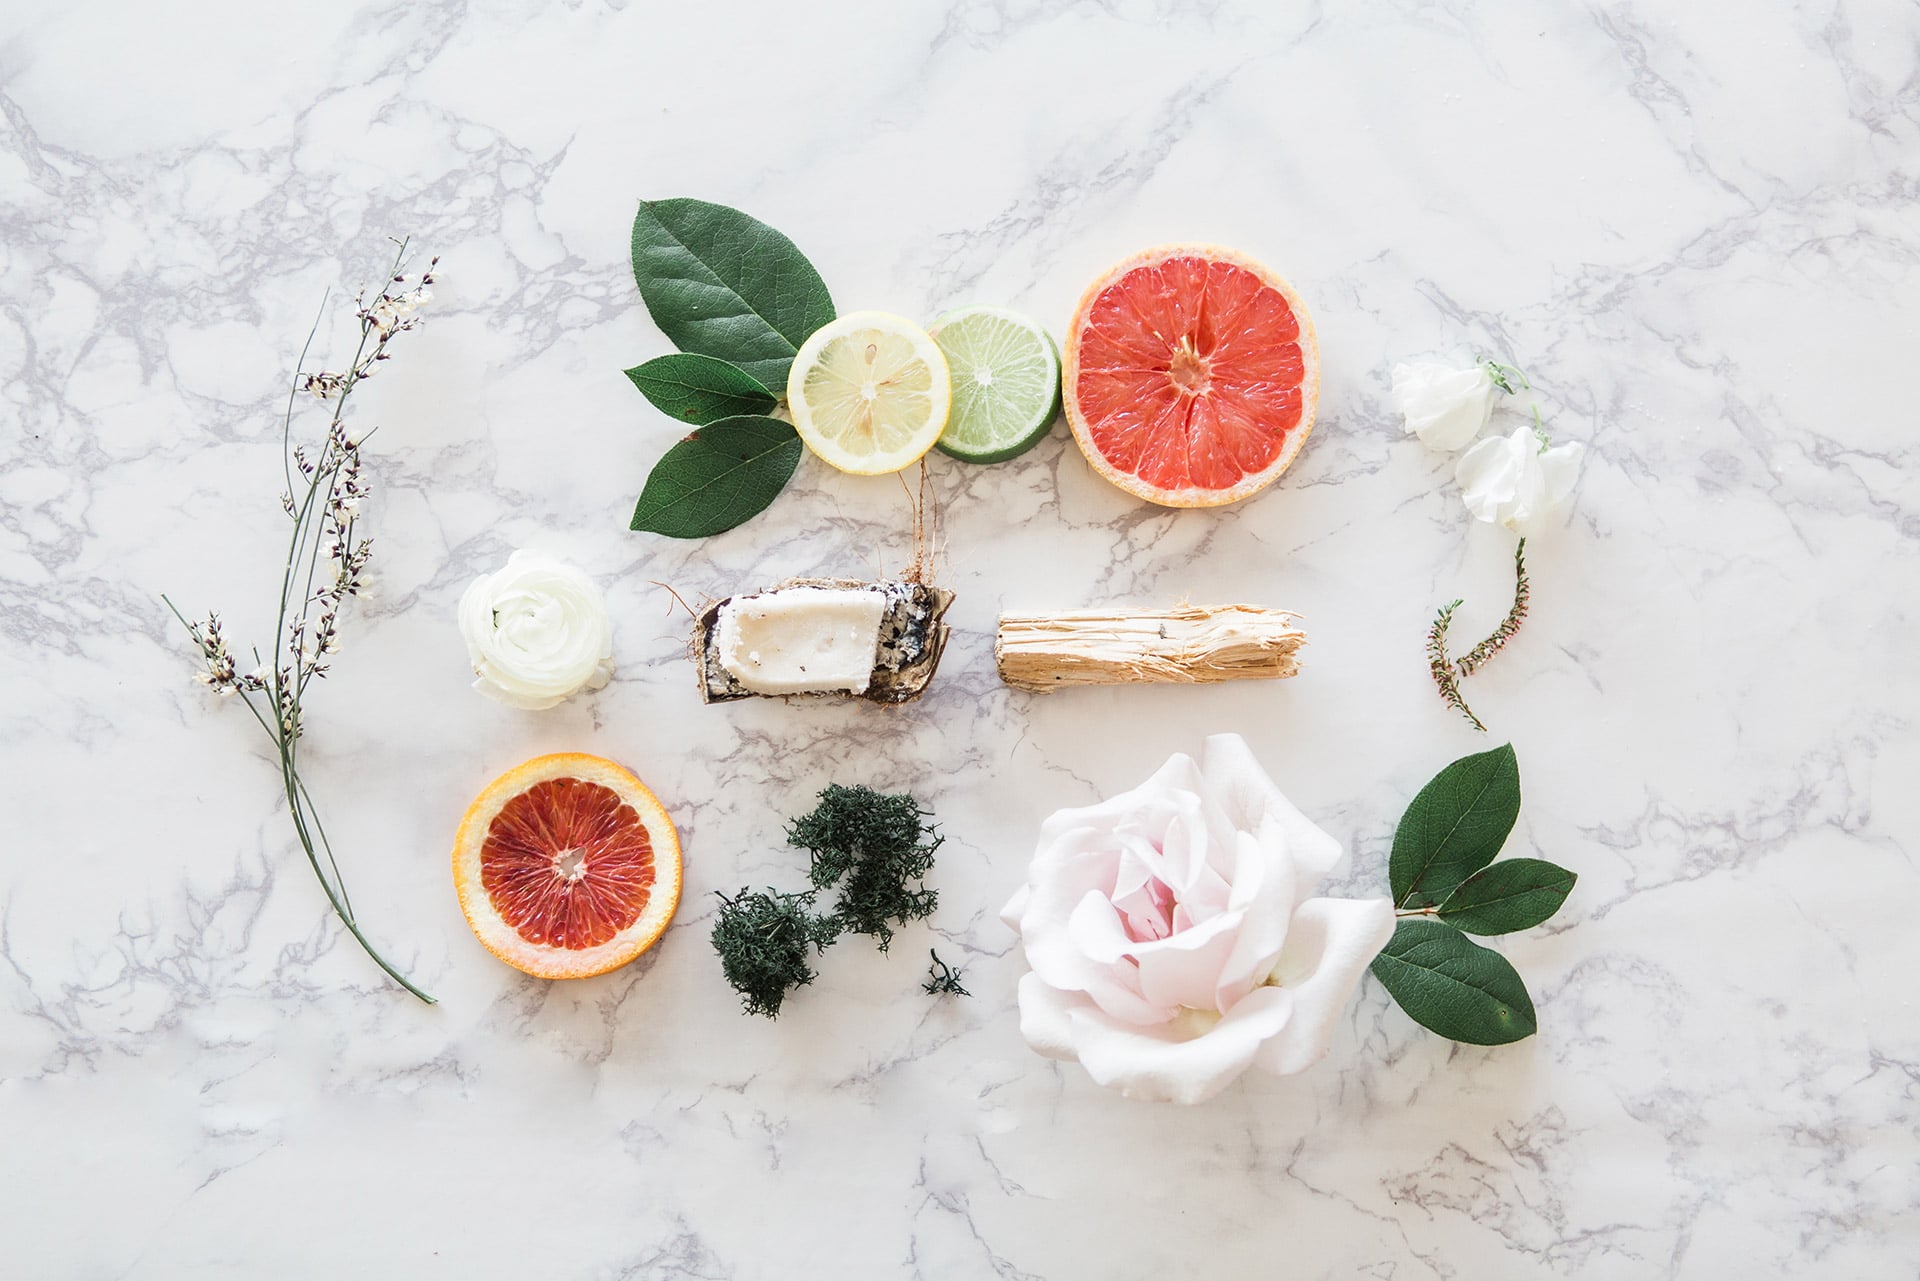 Flat lay arrangement of botanical and spiritual elements including citrus slices, herbs, and flowers on a marble surface.